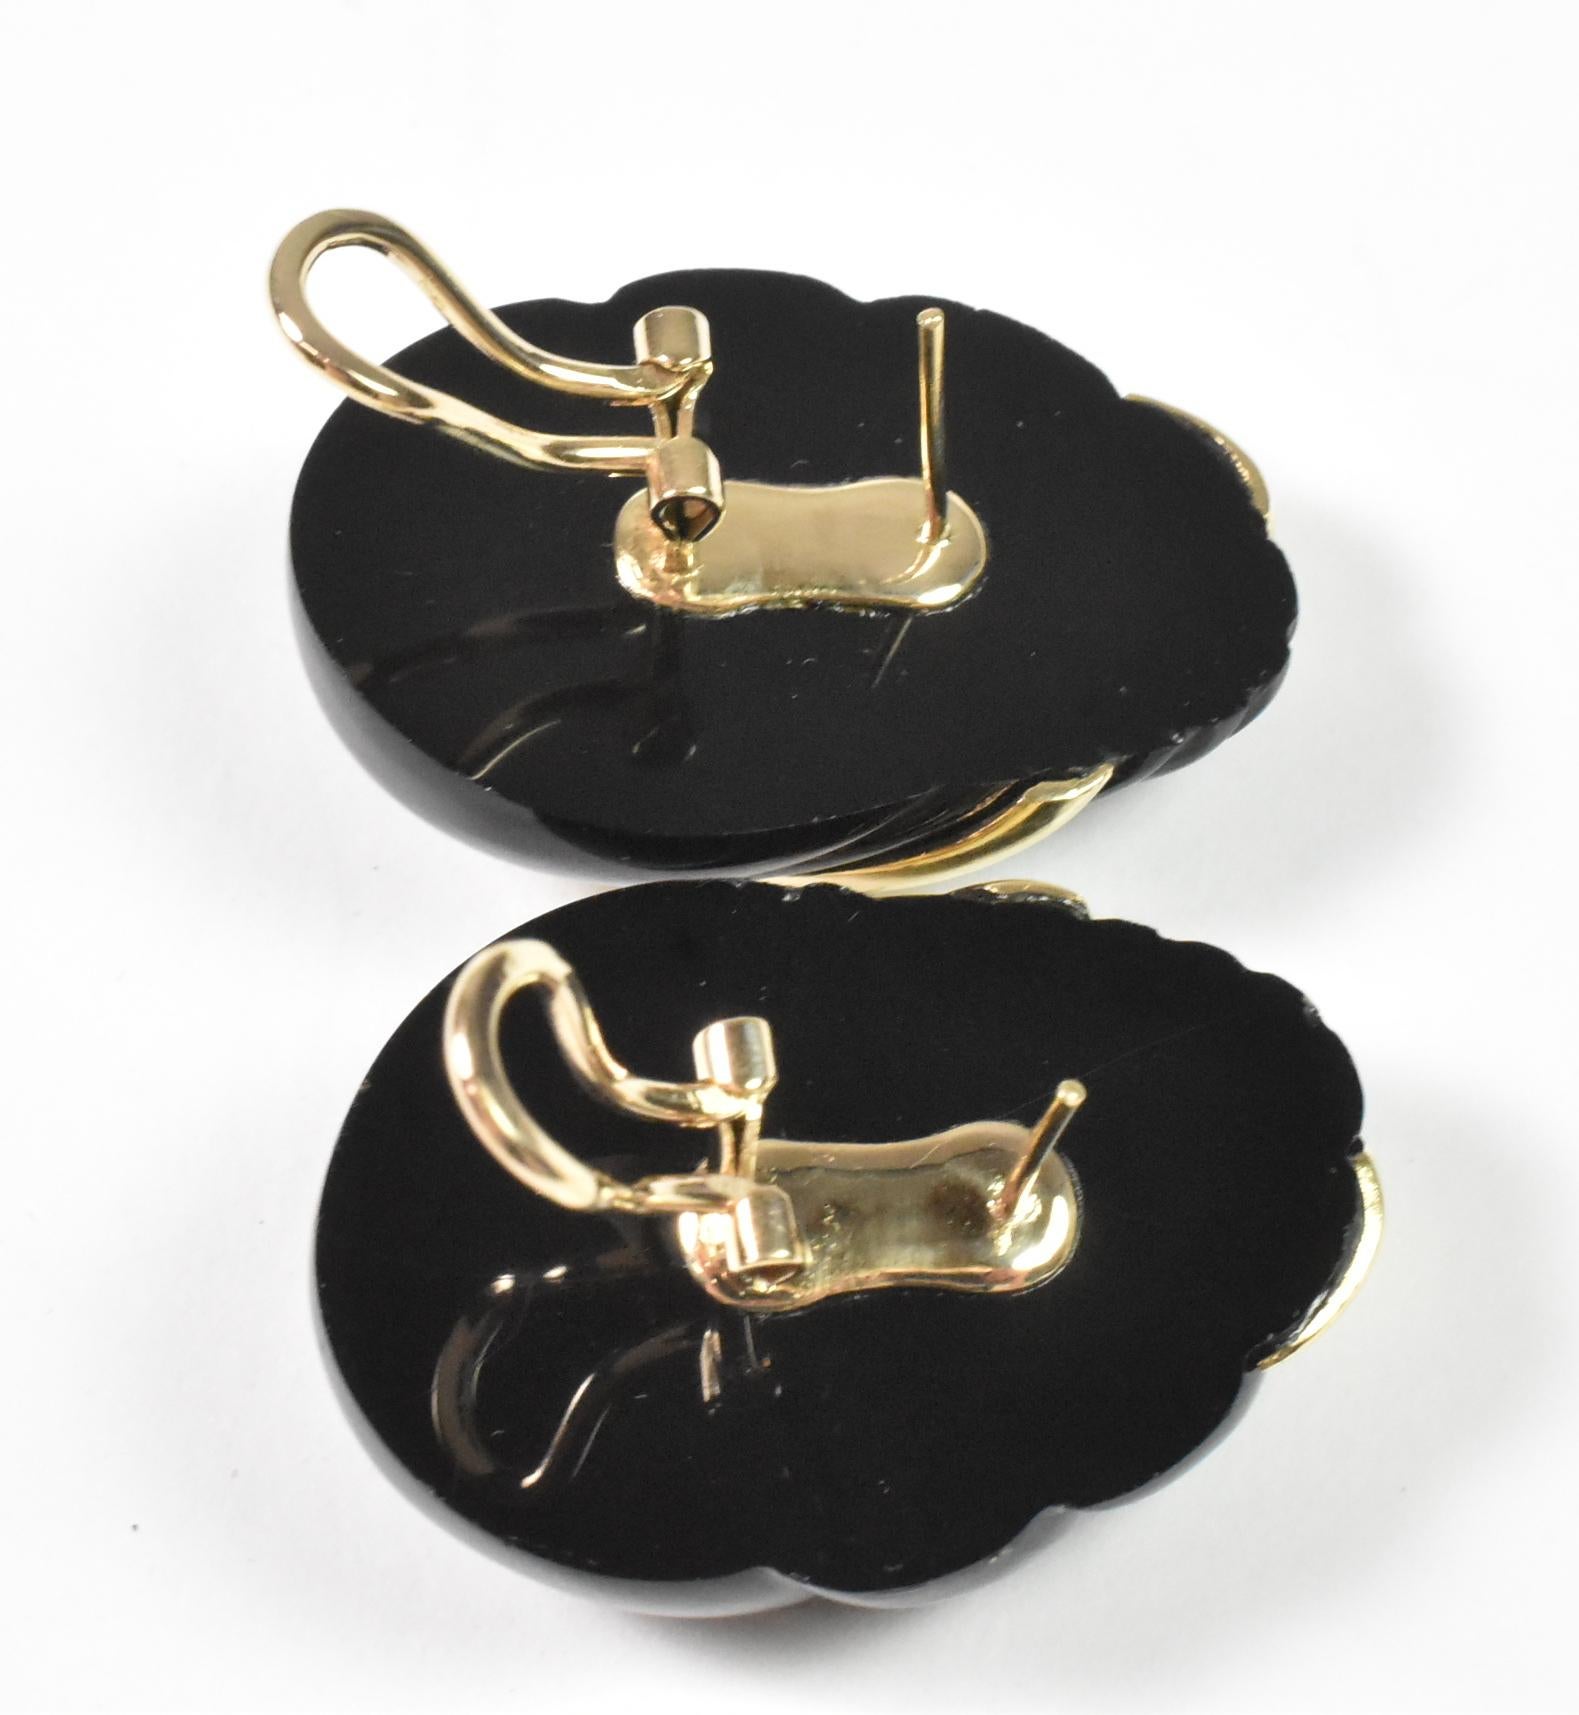 Black onyx earrings, 14K yellow gold, Omega French Clips. Pierced. Vintage oversized statement earrings. Art deco style, carved black onyx in a soothing wave like pattern accented with 14K gold. Omega French clip backs for extra security. 1 3/8